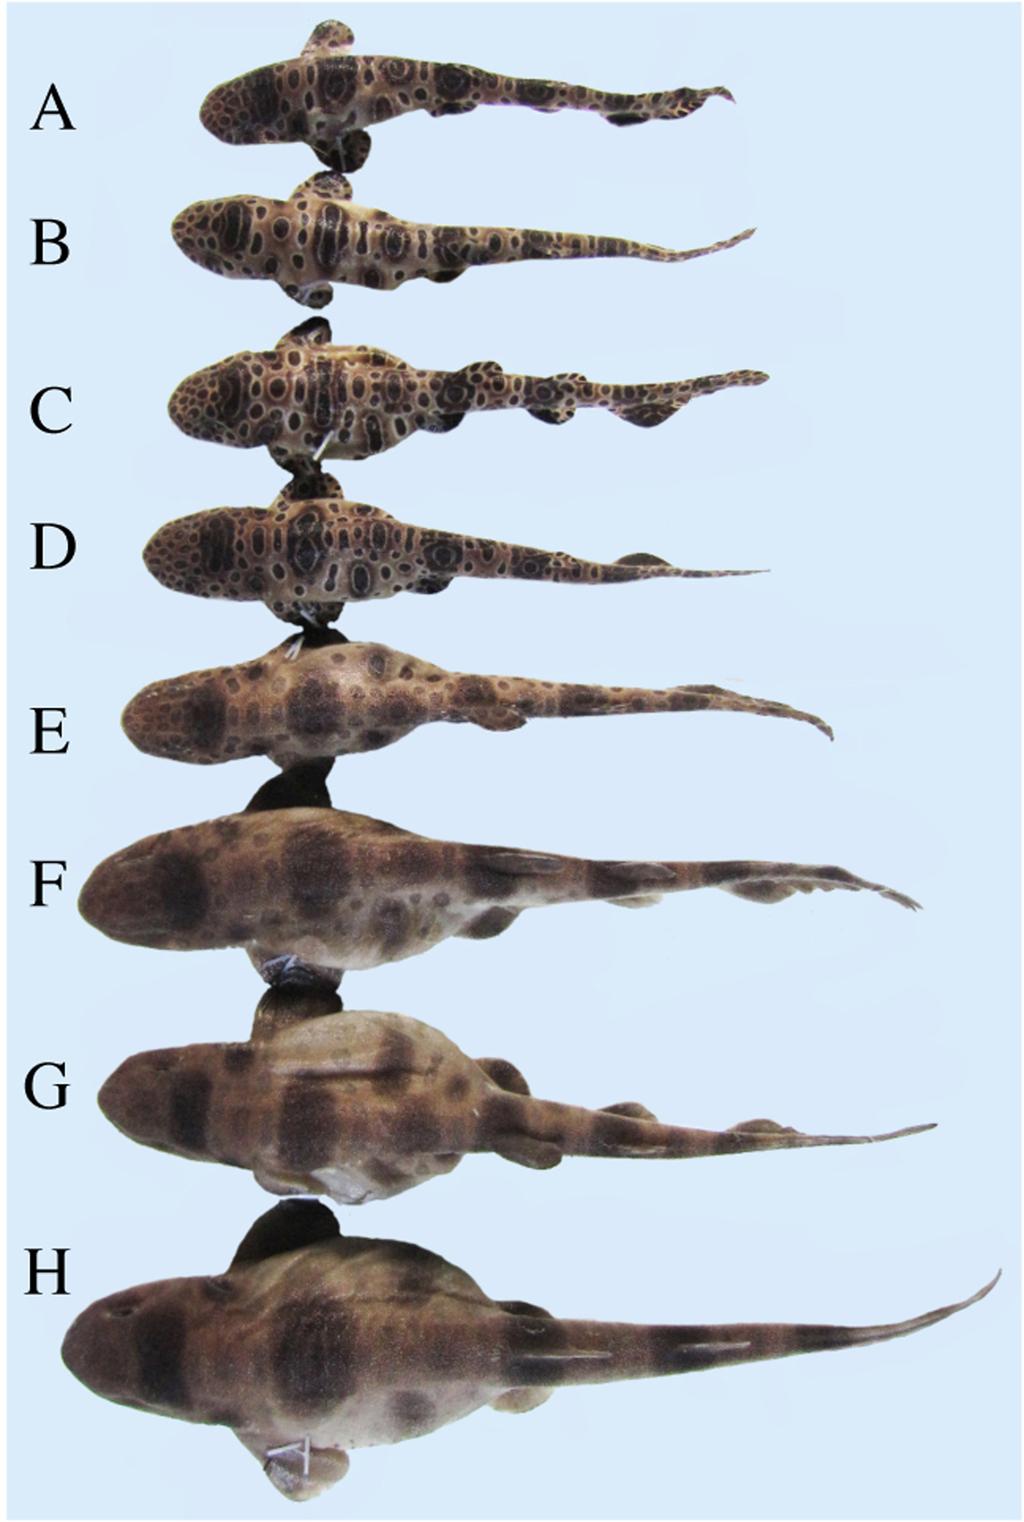 FIGURE 5. Dorsal views of Cephaloscyllium sarawakensis, showing color pattern changes with growth.